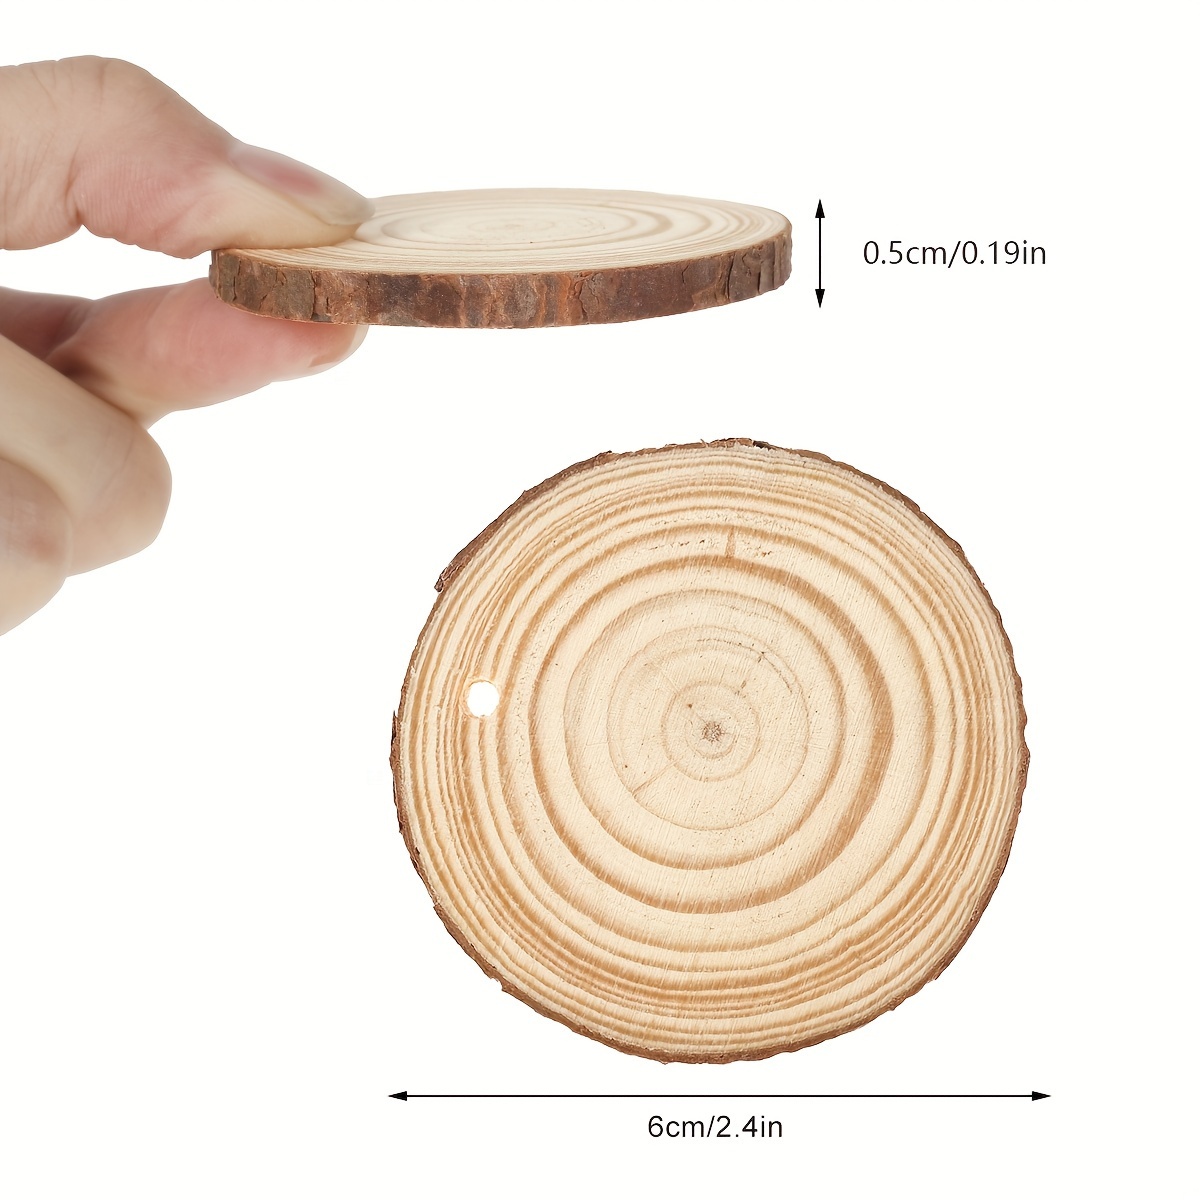 30Pcs Natural Wood Slices Unfinished Wooden Slices Rustic Pieces